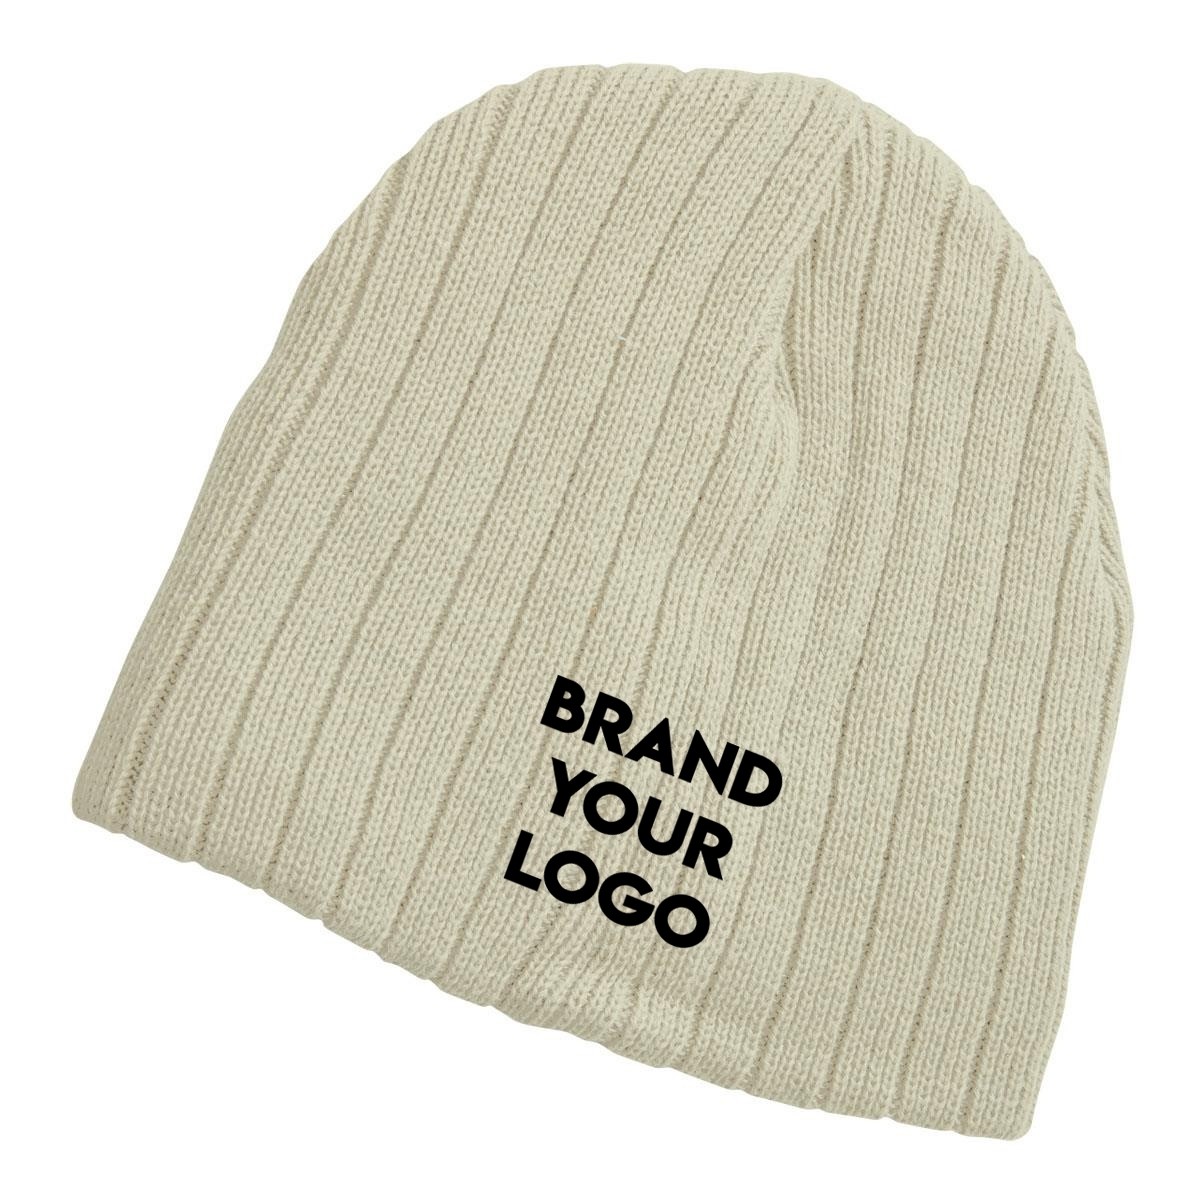 Knit Embroidered Beanies 